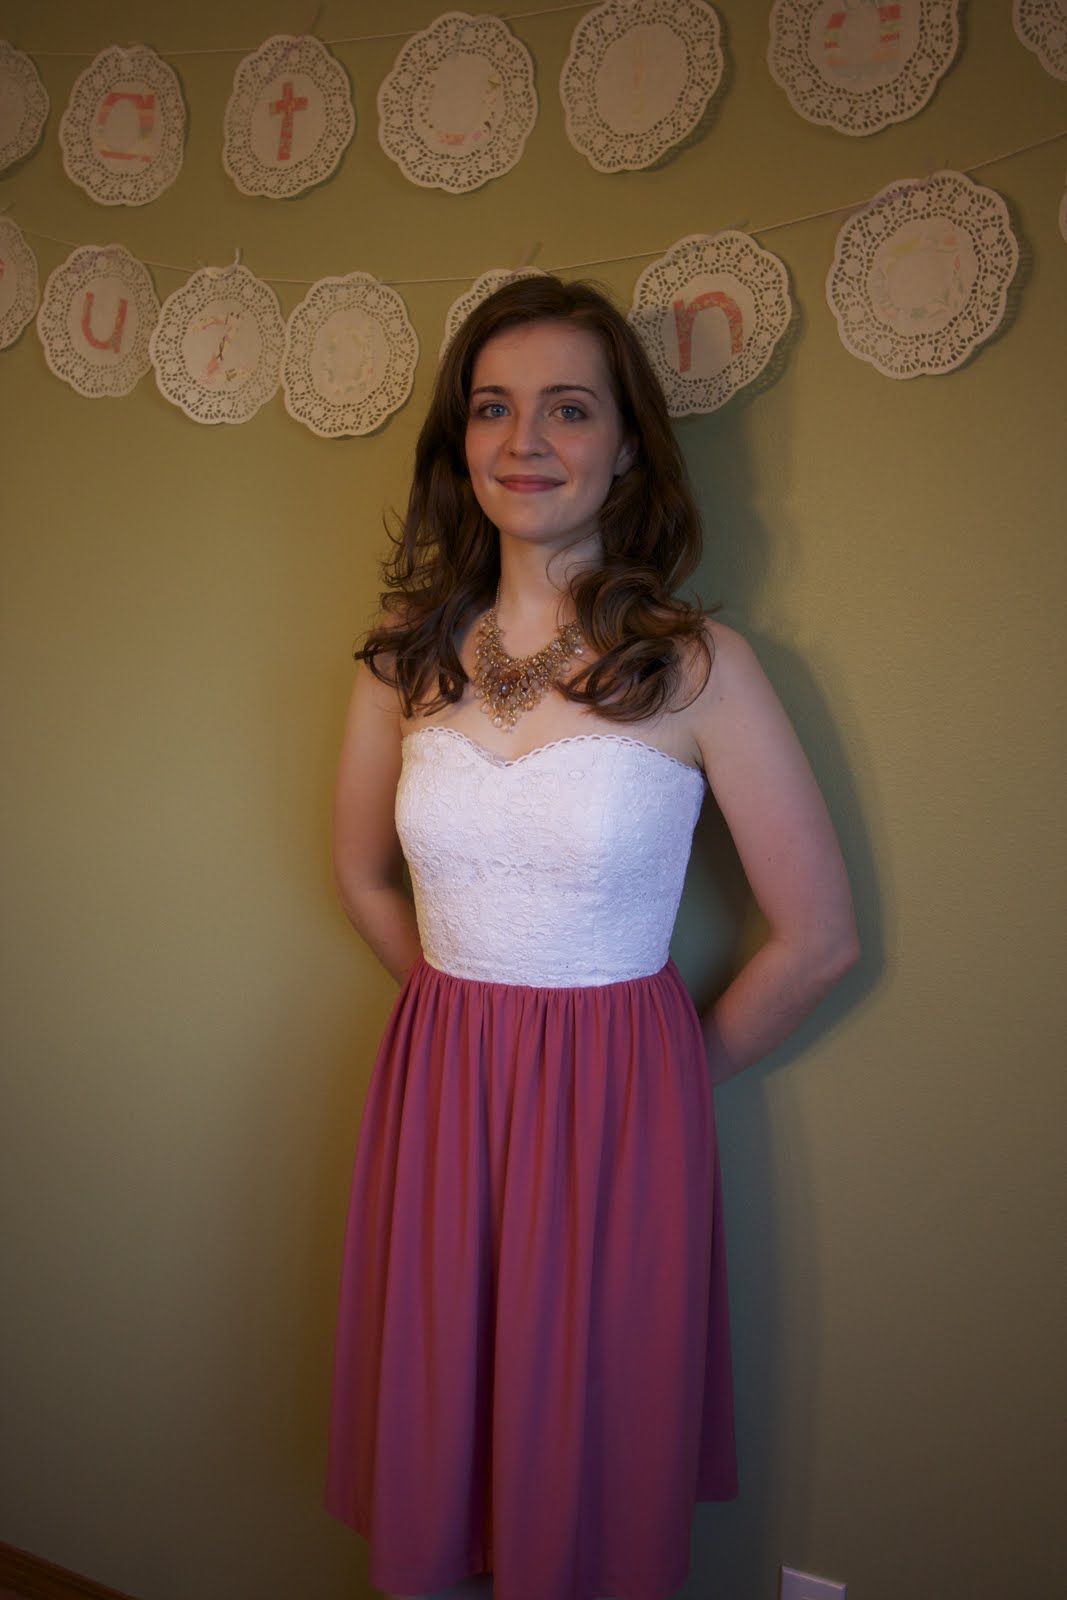 Adventures in Dressmaking: A half-lace dress